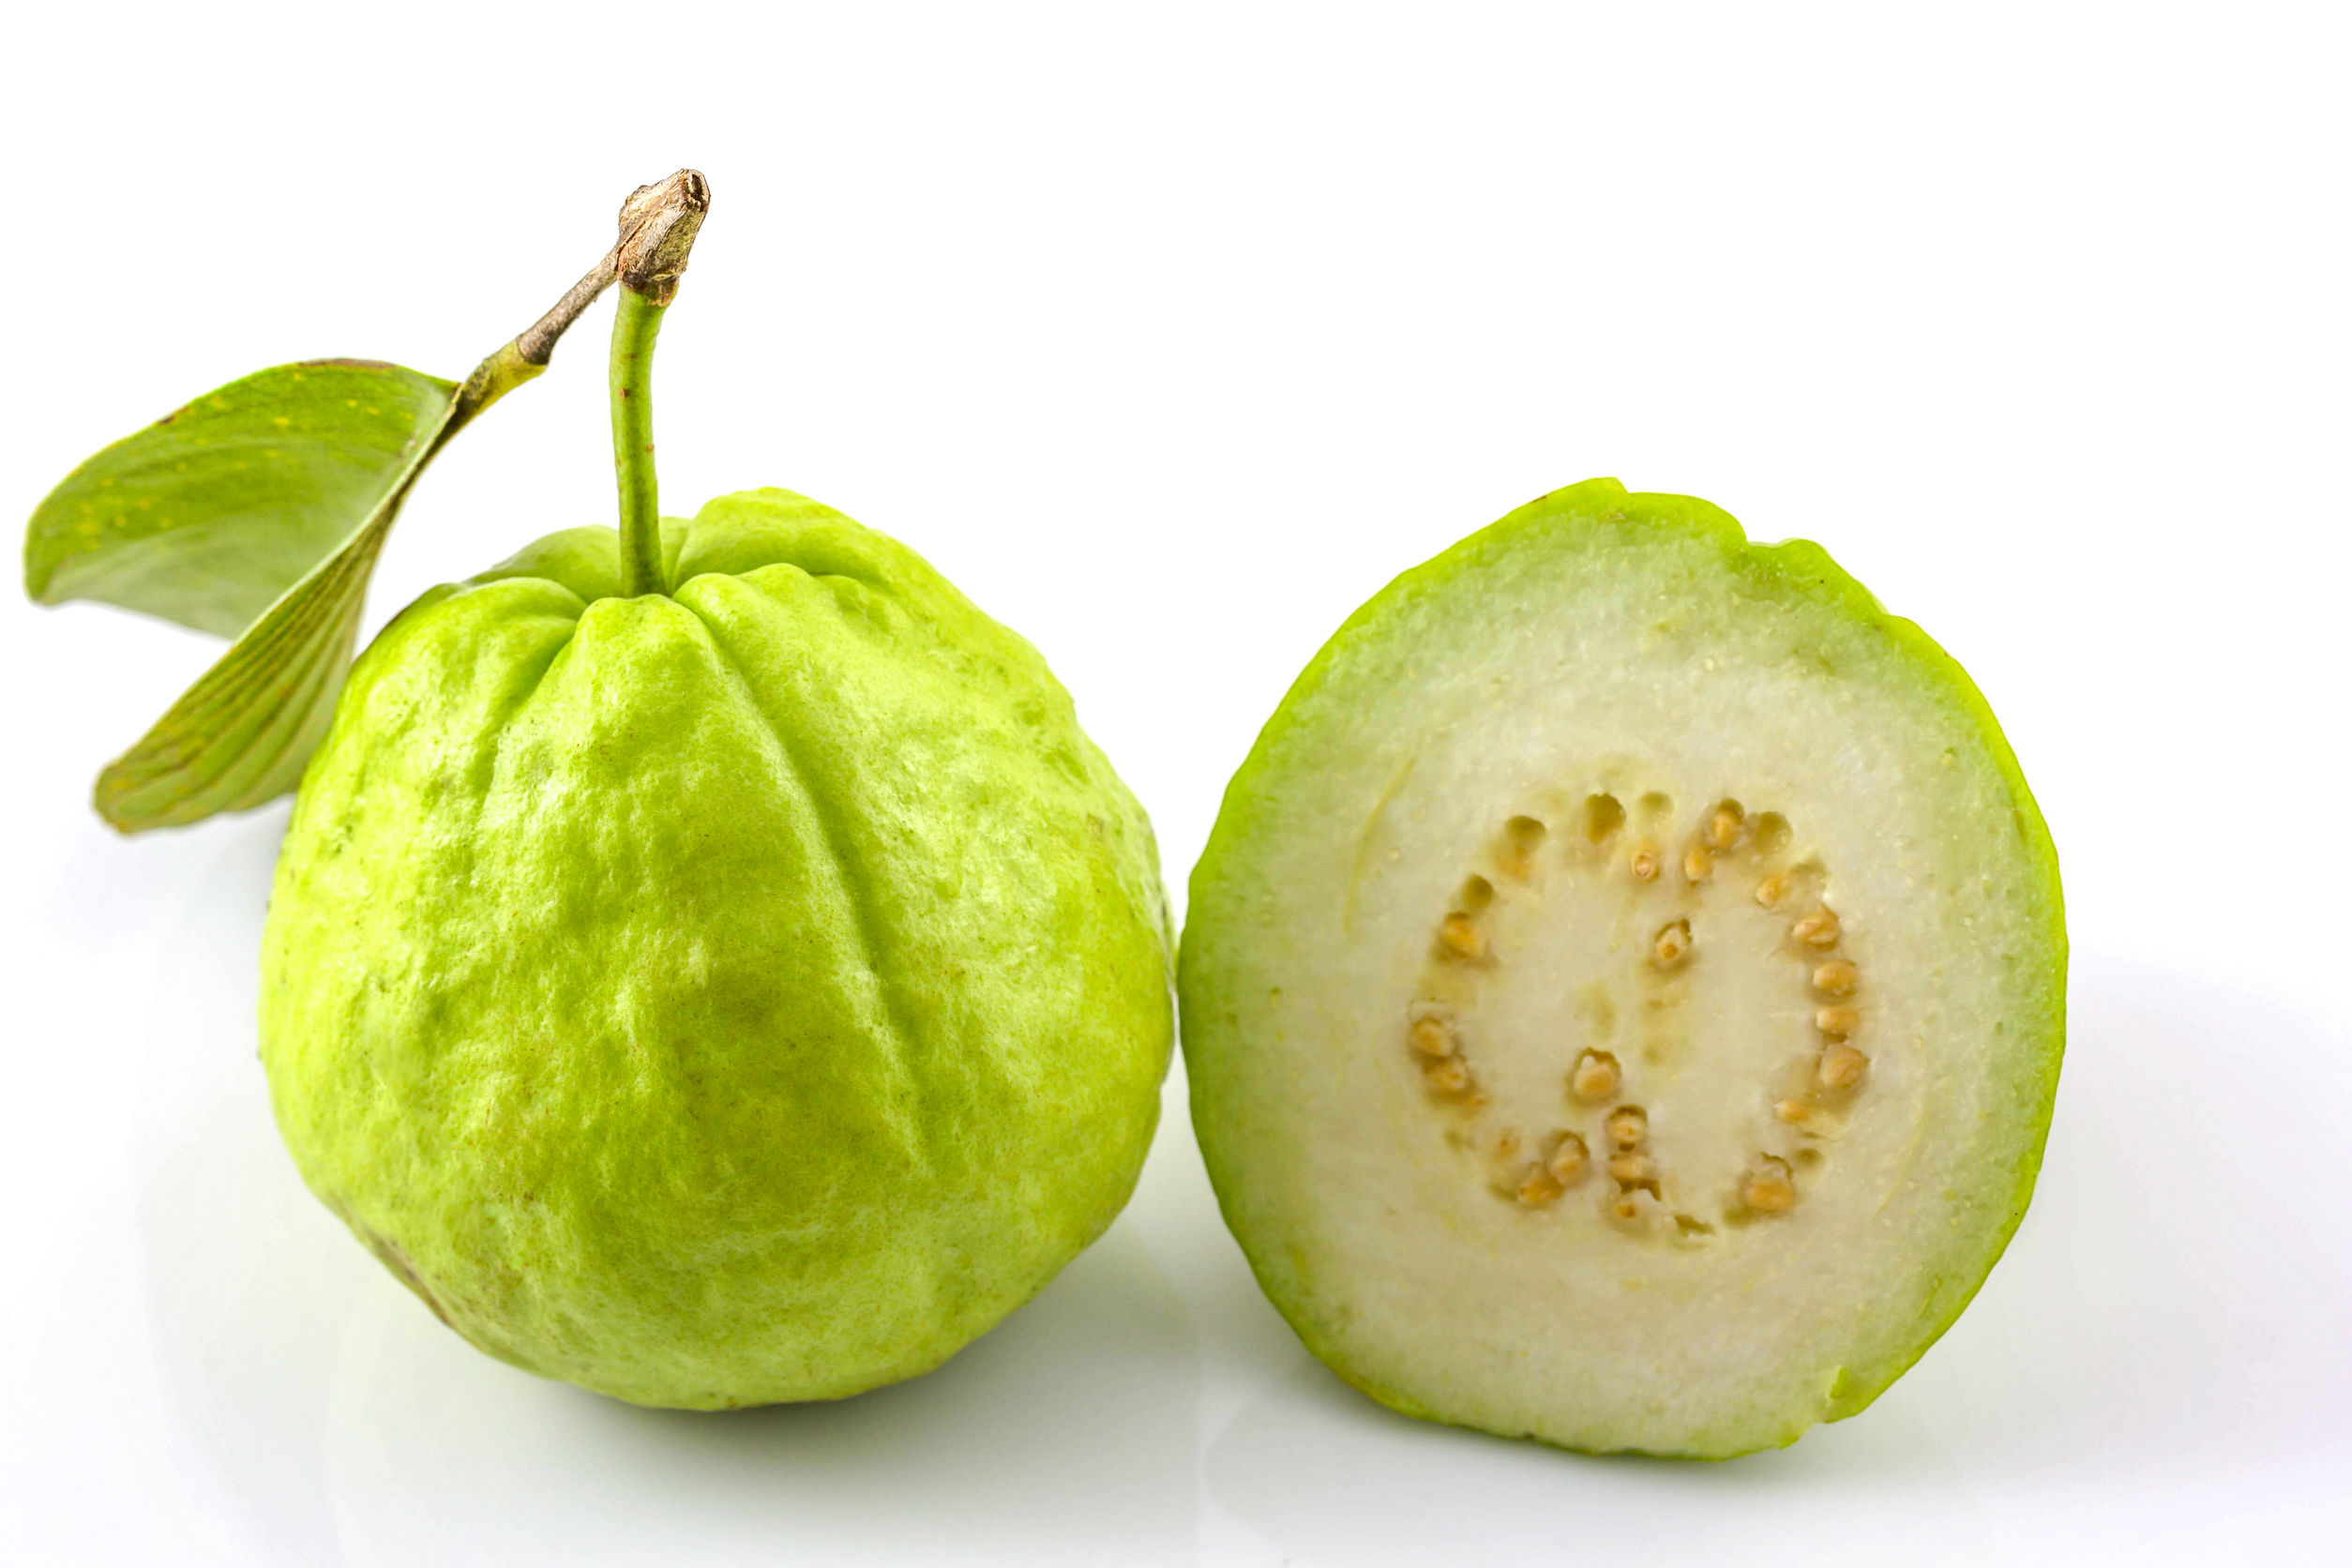 7 Mind-Blowing Reasons To Eat More Guava